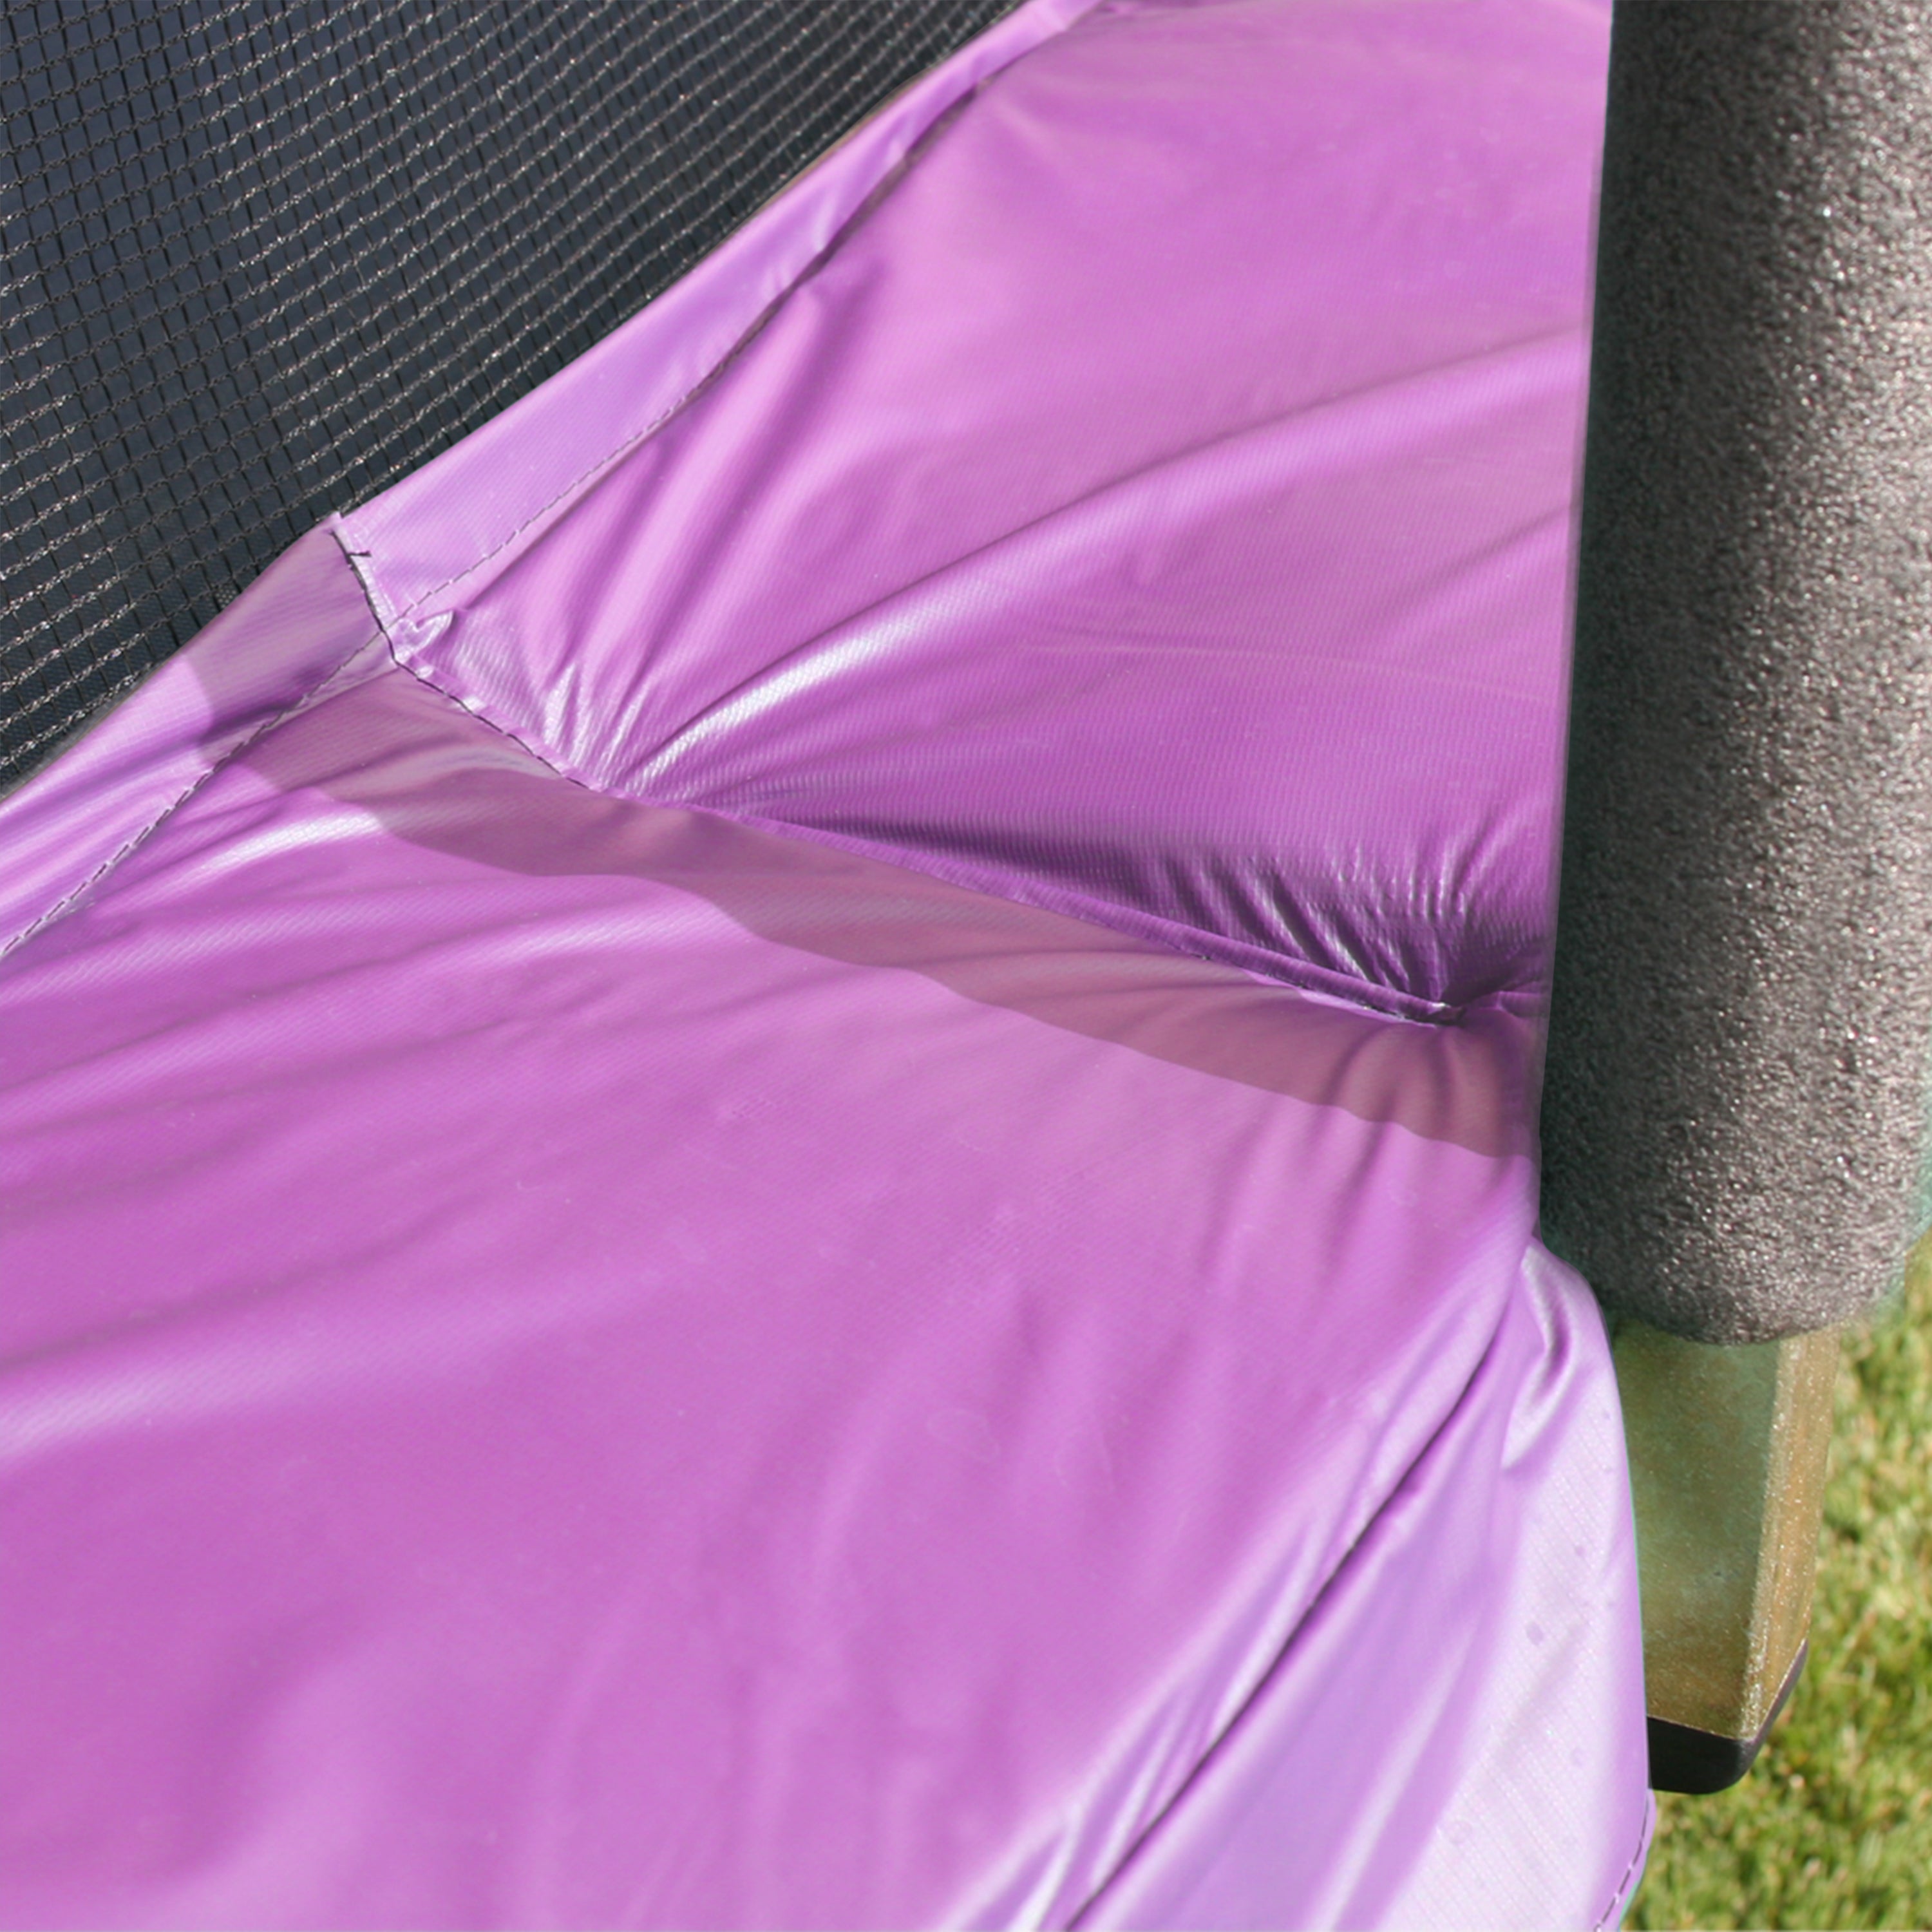 Purple spring pad covers the springs on the trampoline. 